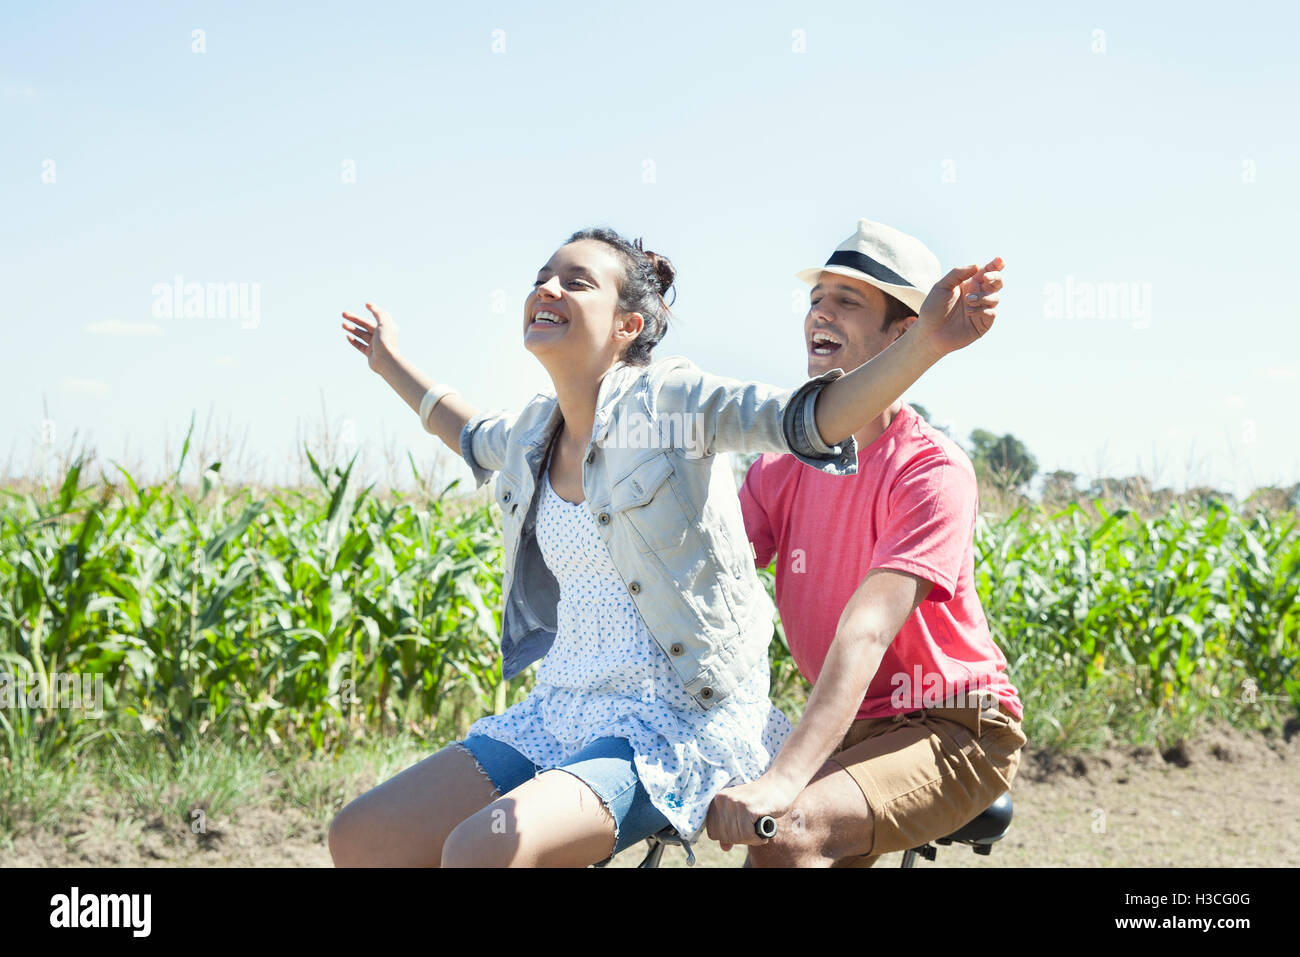 Couple riding bike together, woman with arms outstretched Stock Photo